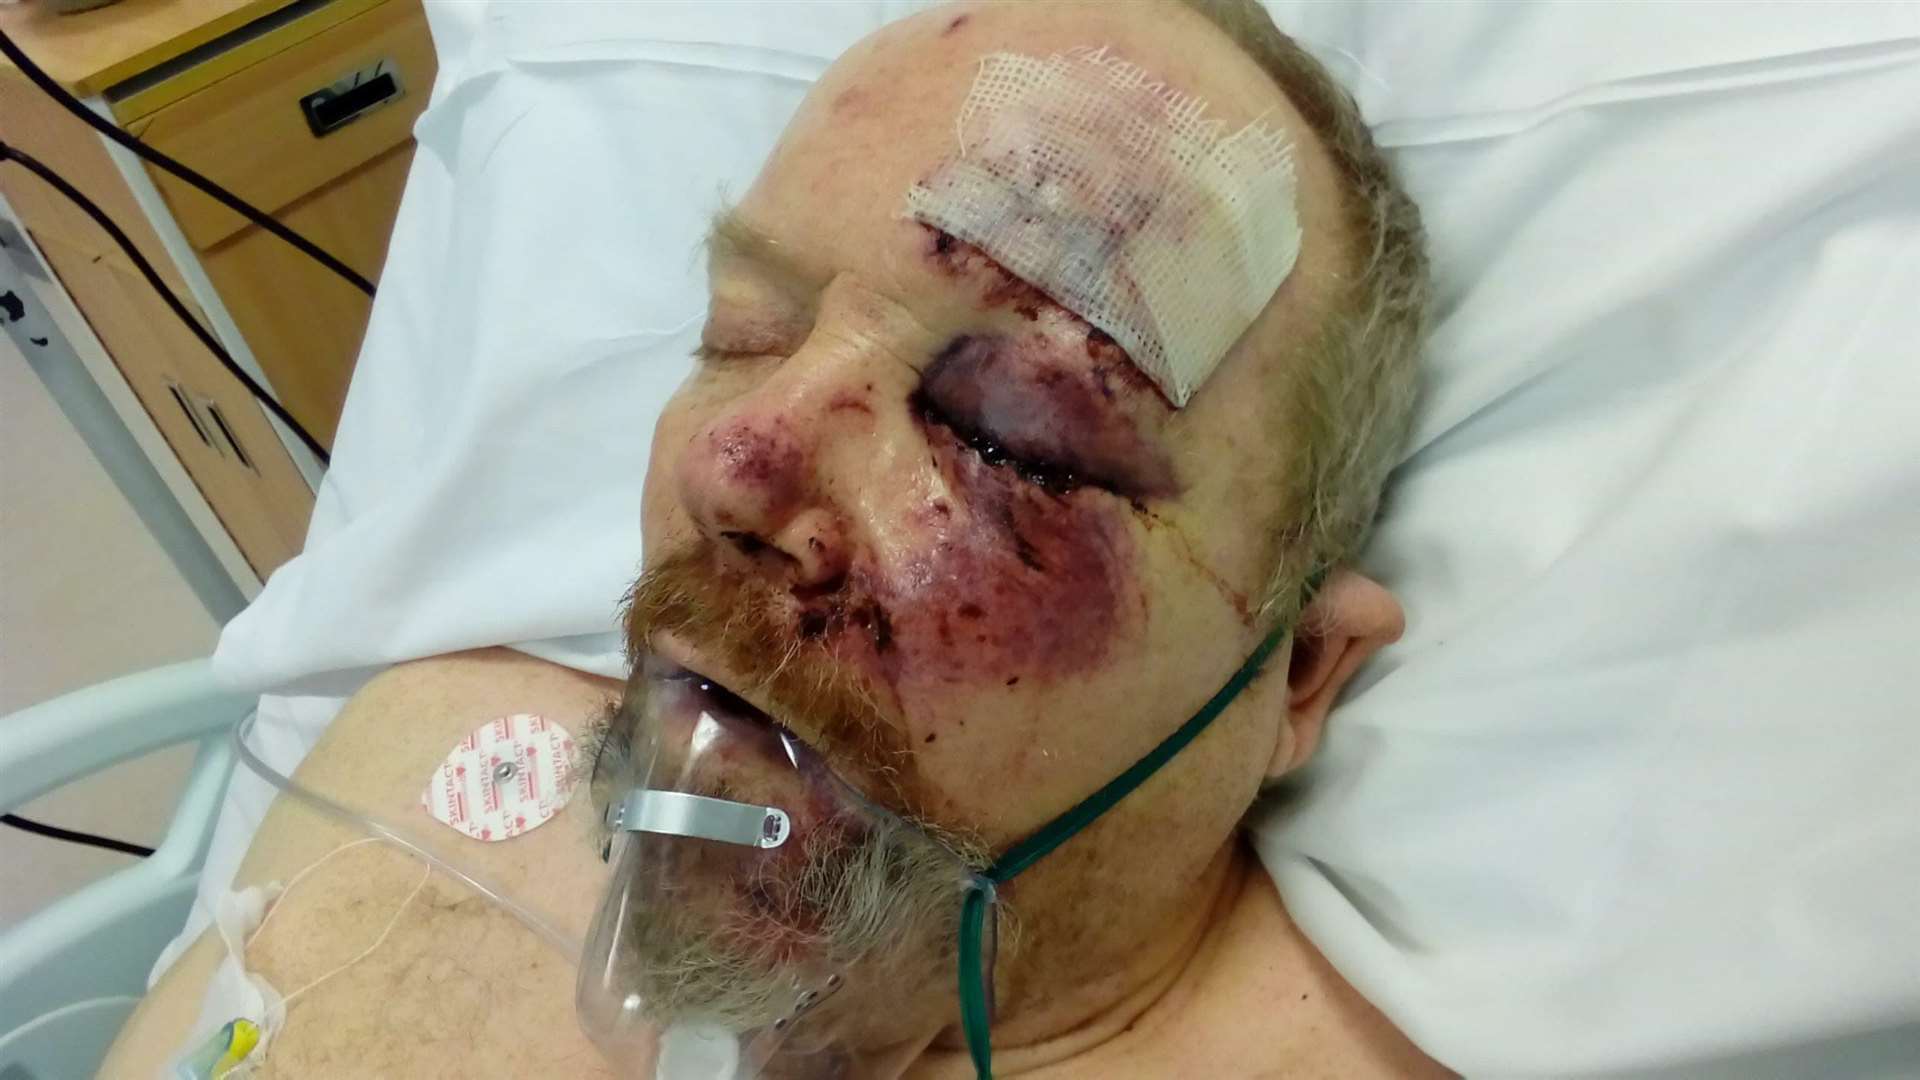 Vince Marsh suffered serious injuries (2886858)